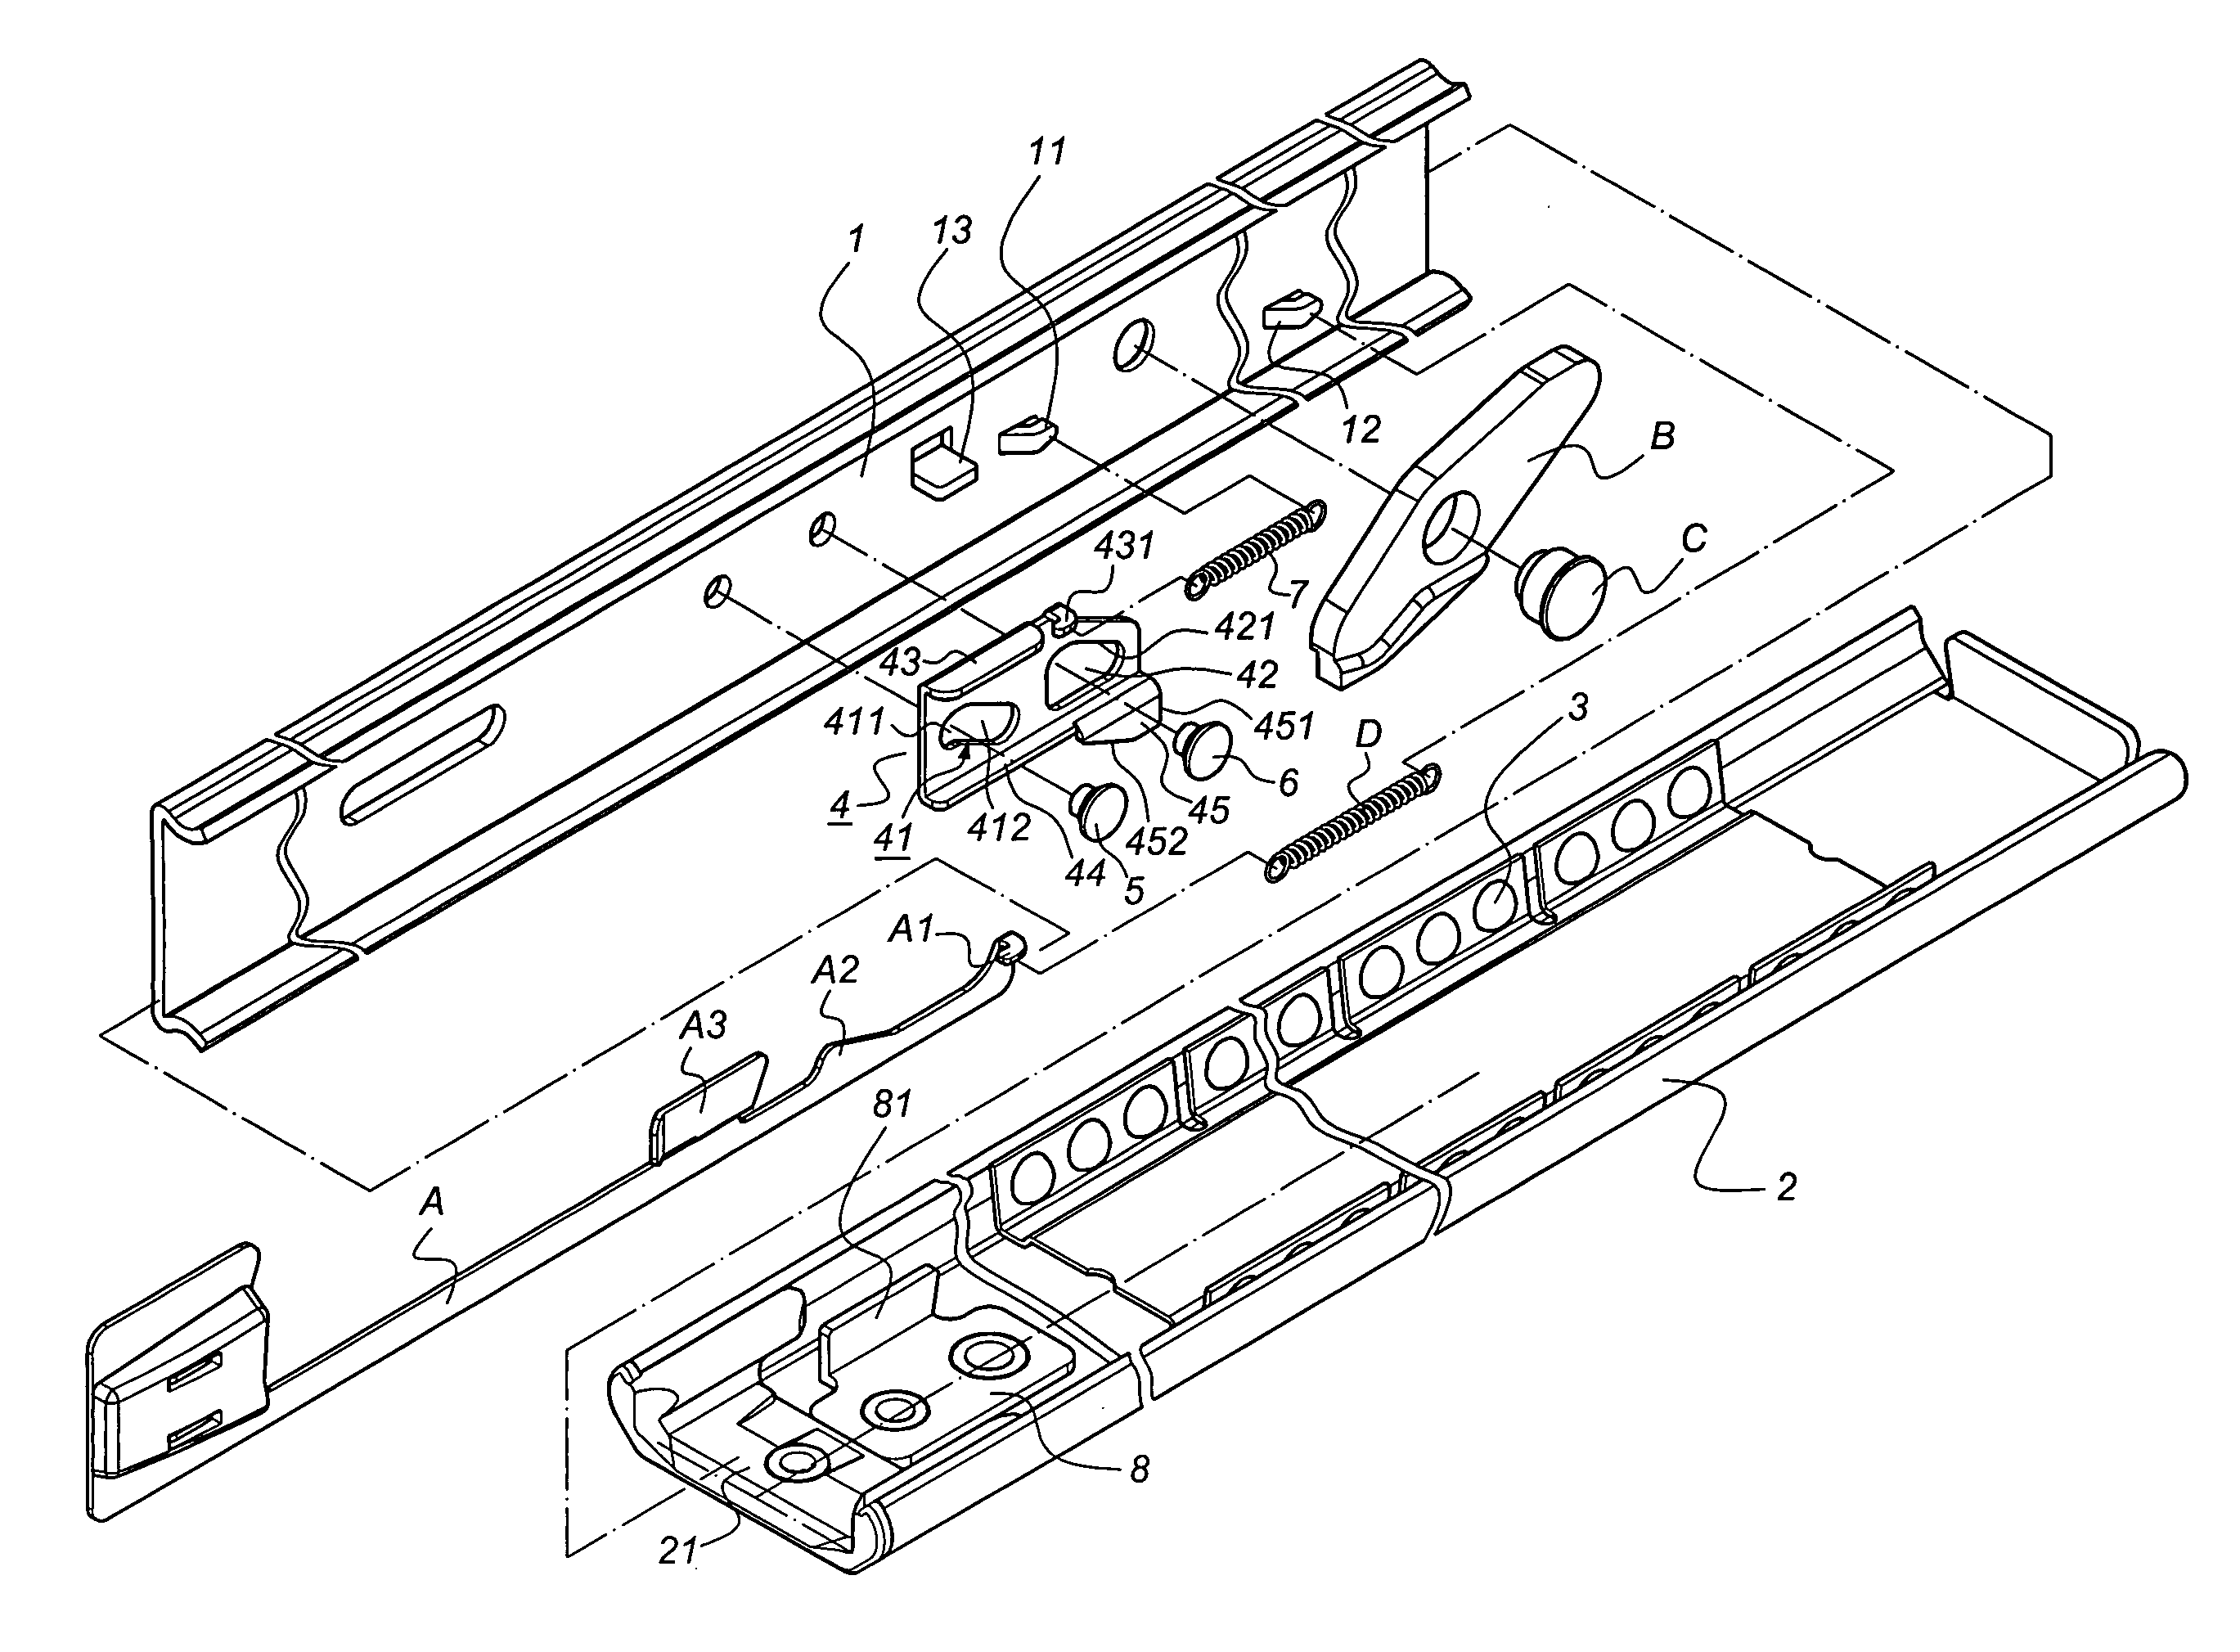 Positioning device for a slide